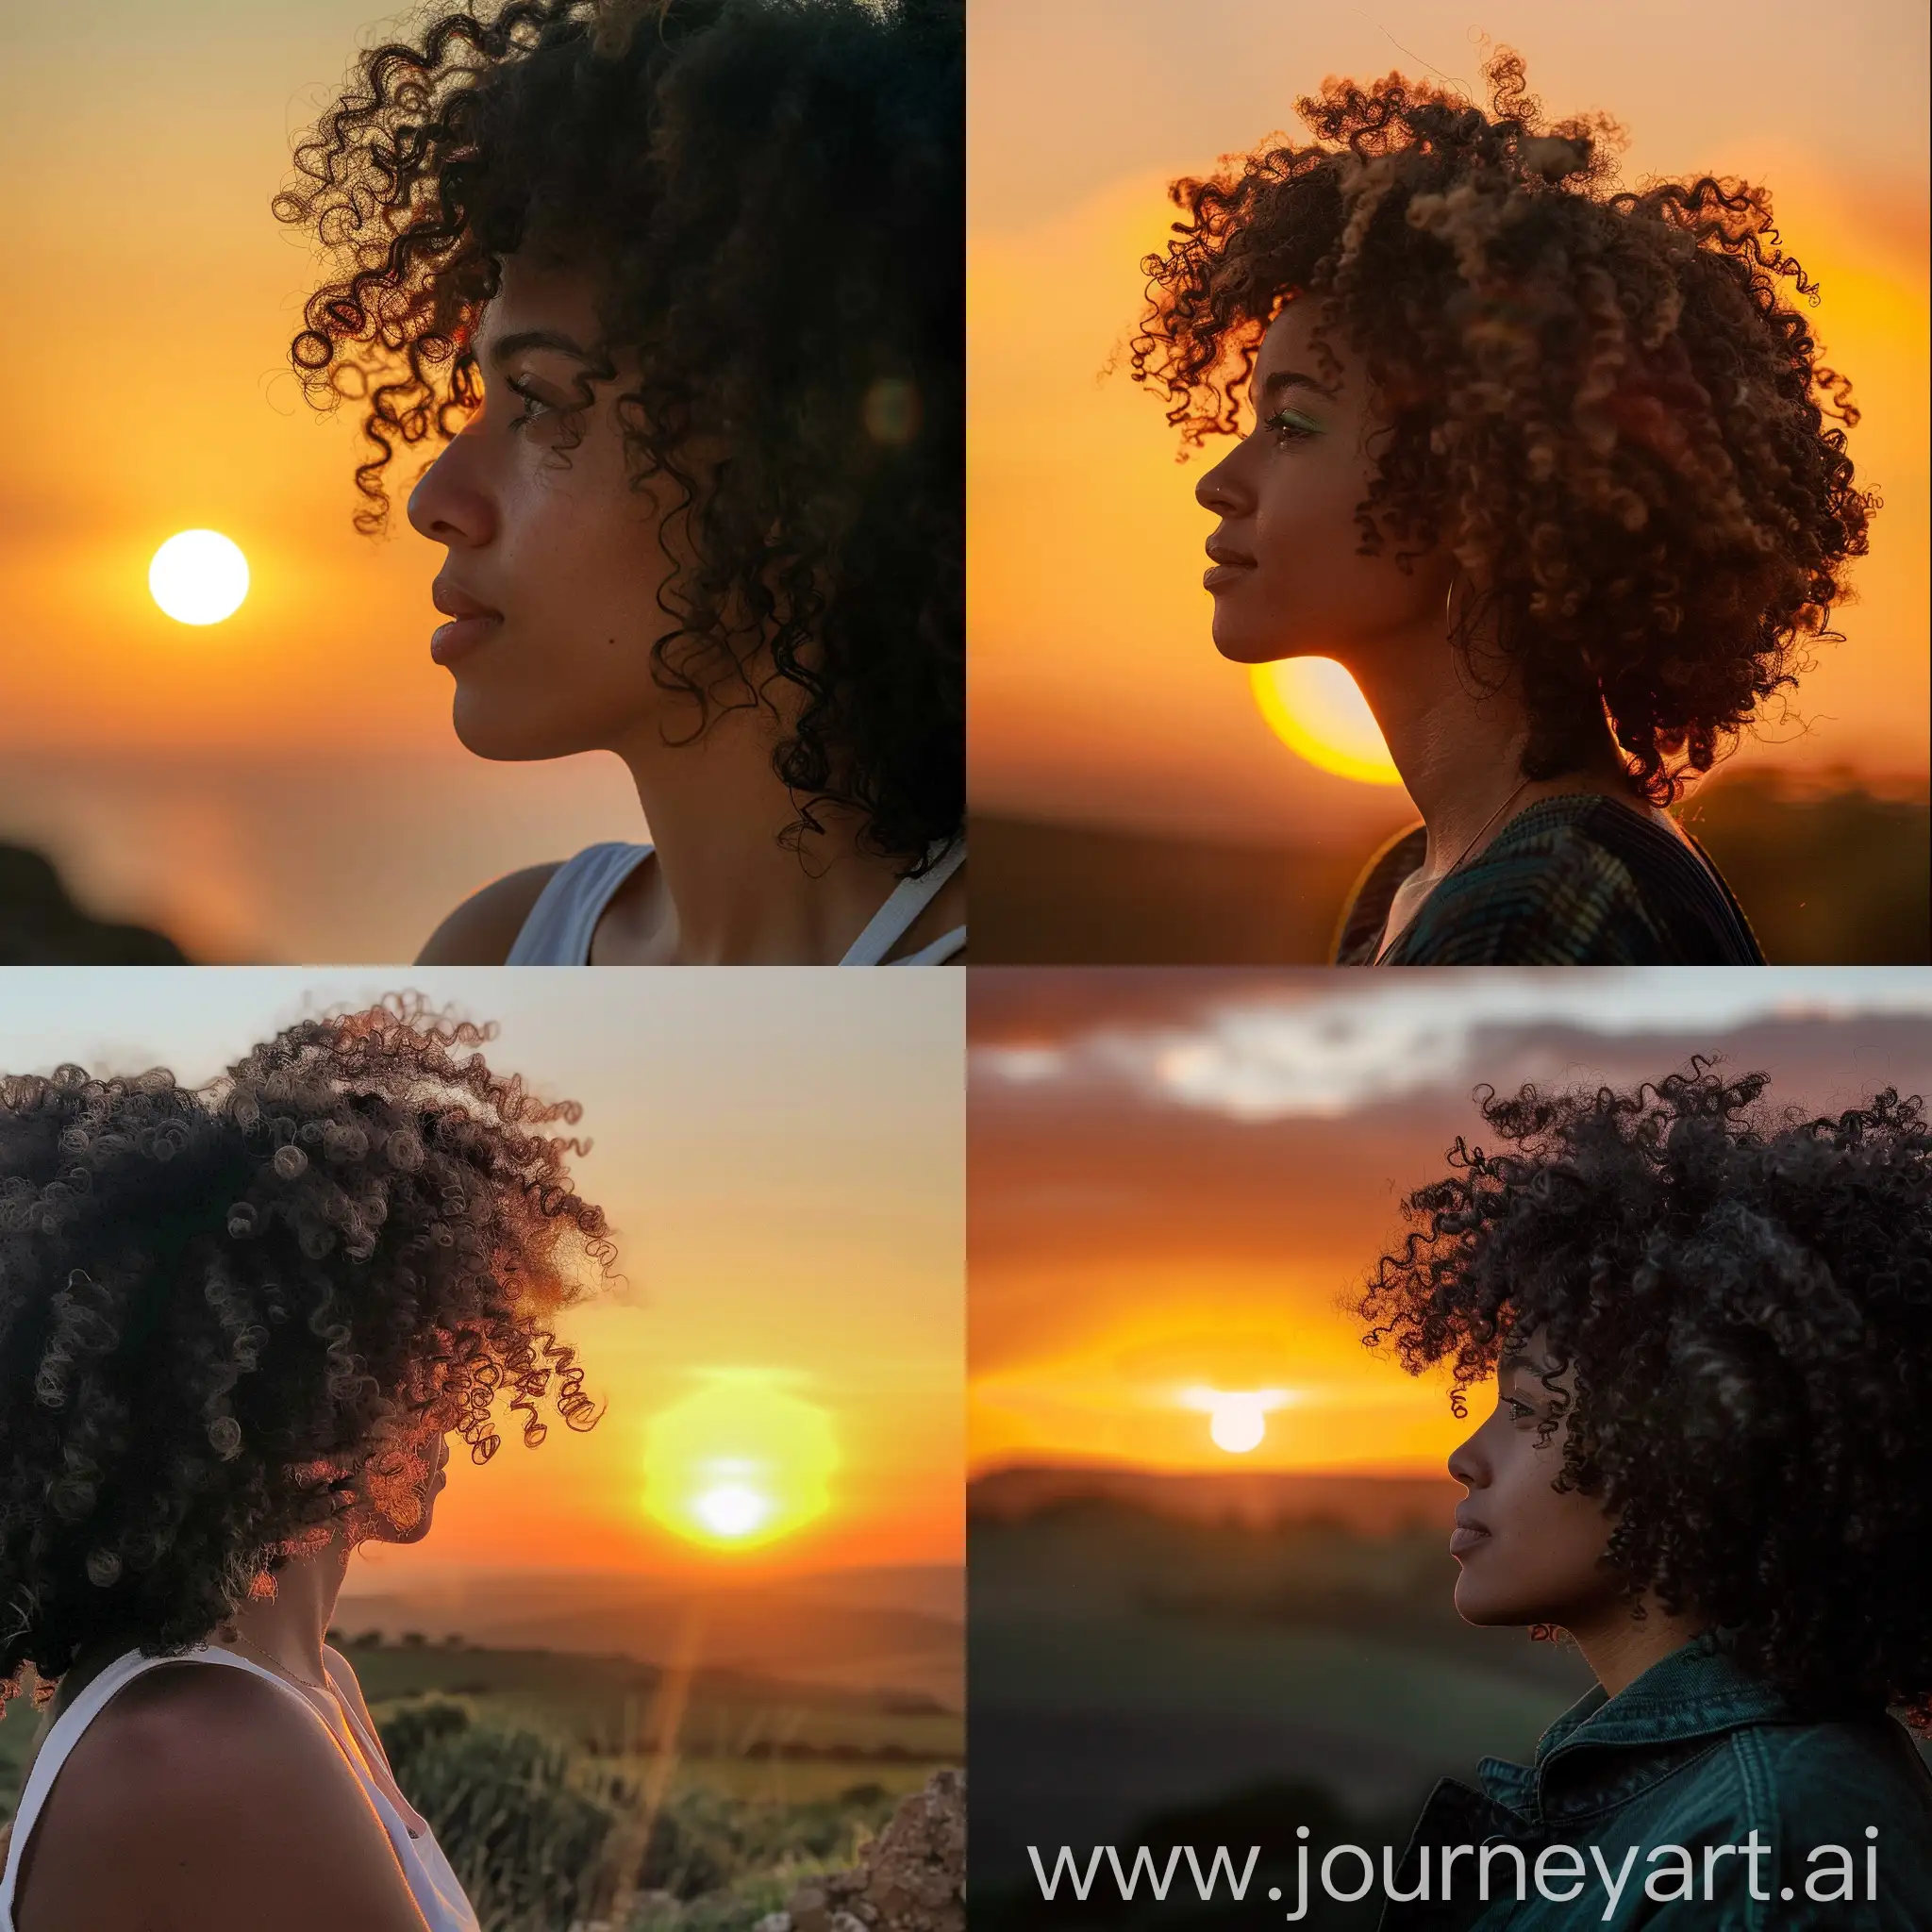 A woman with curly hair watching the sunset